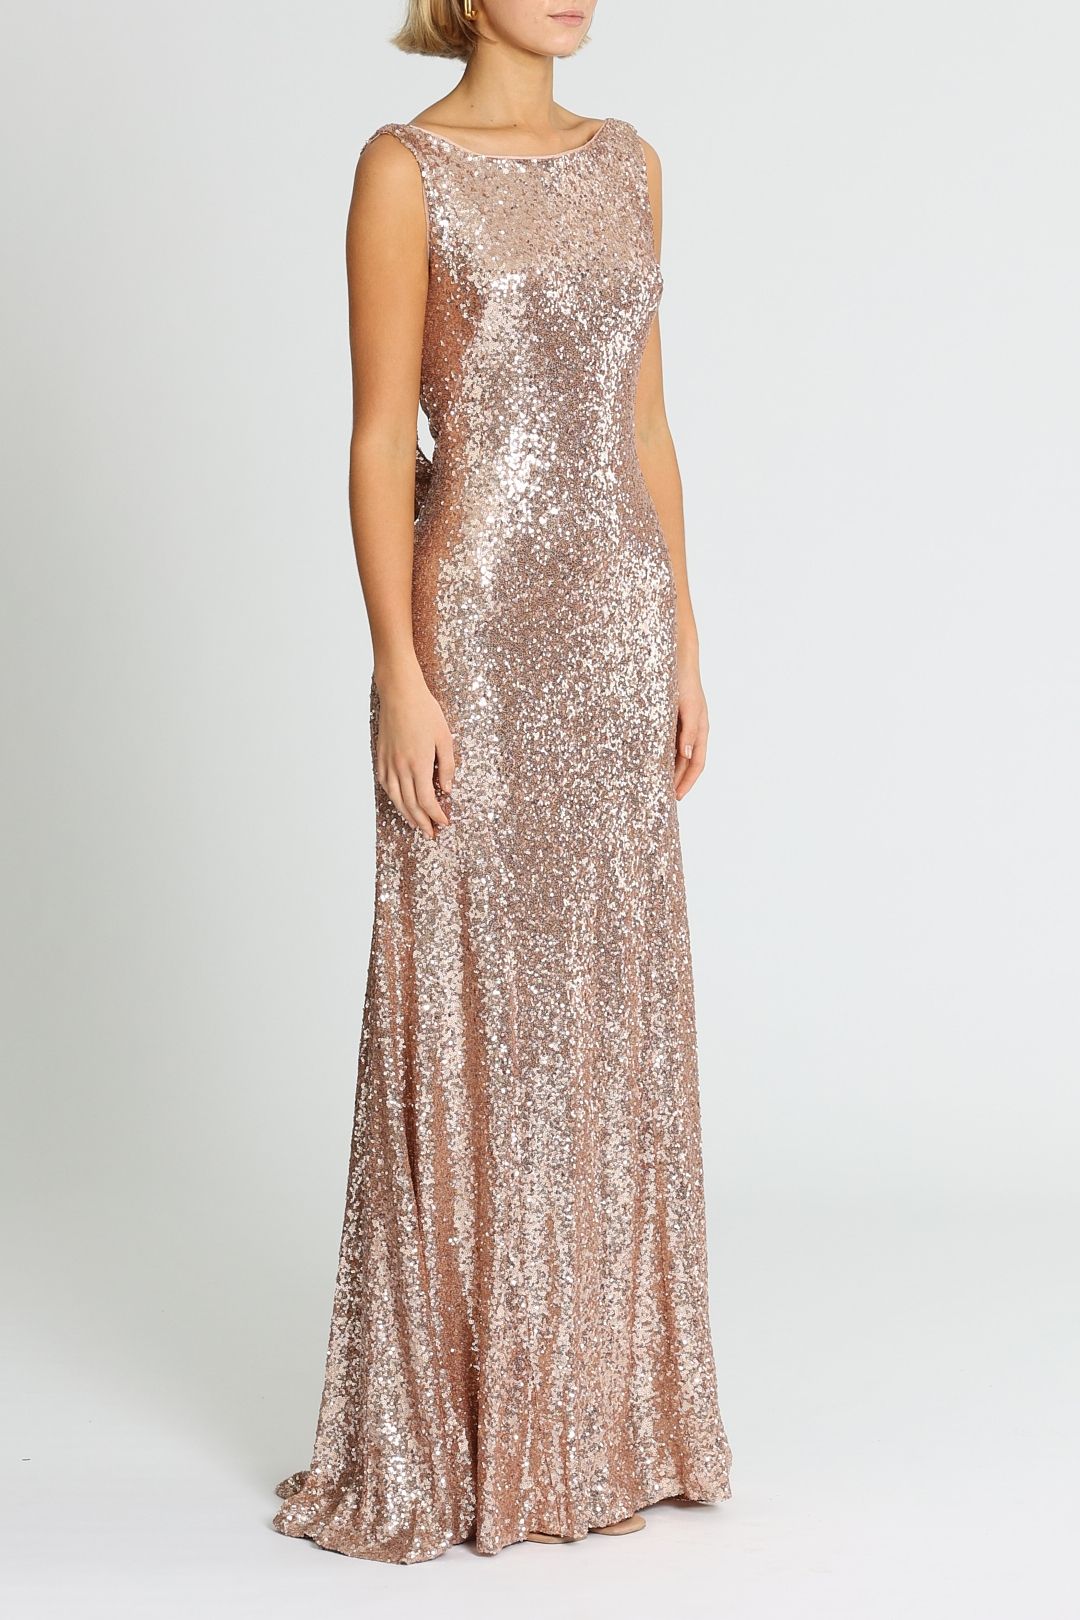 Theia Gemma Gown Rose Gold Sequins